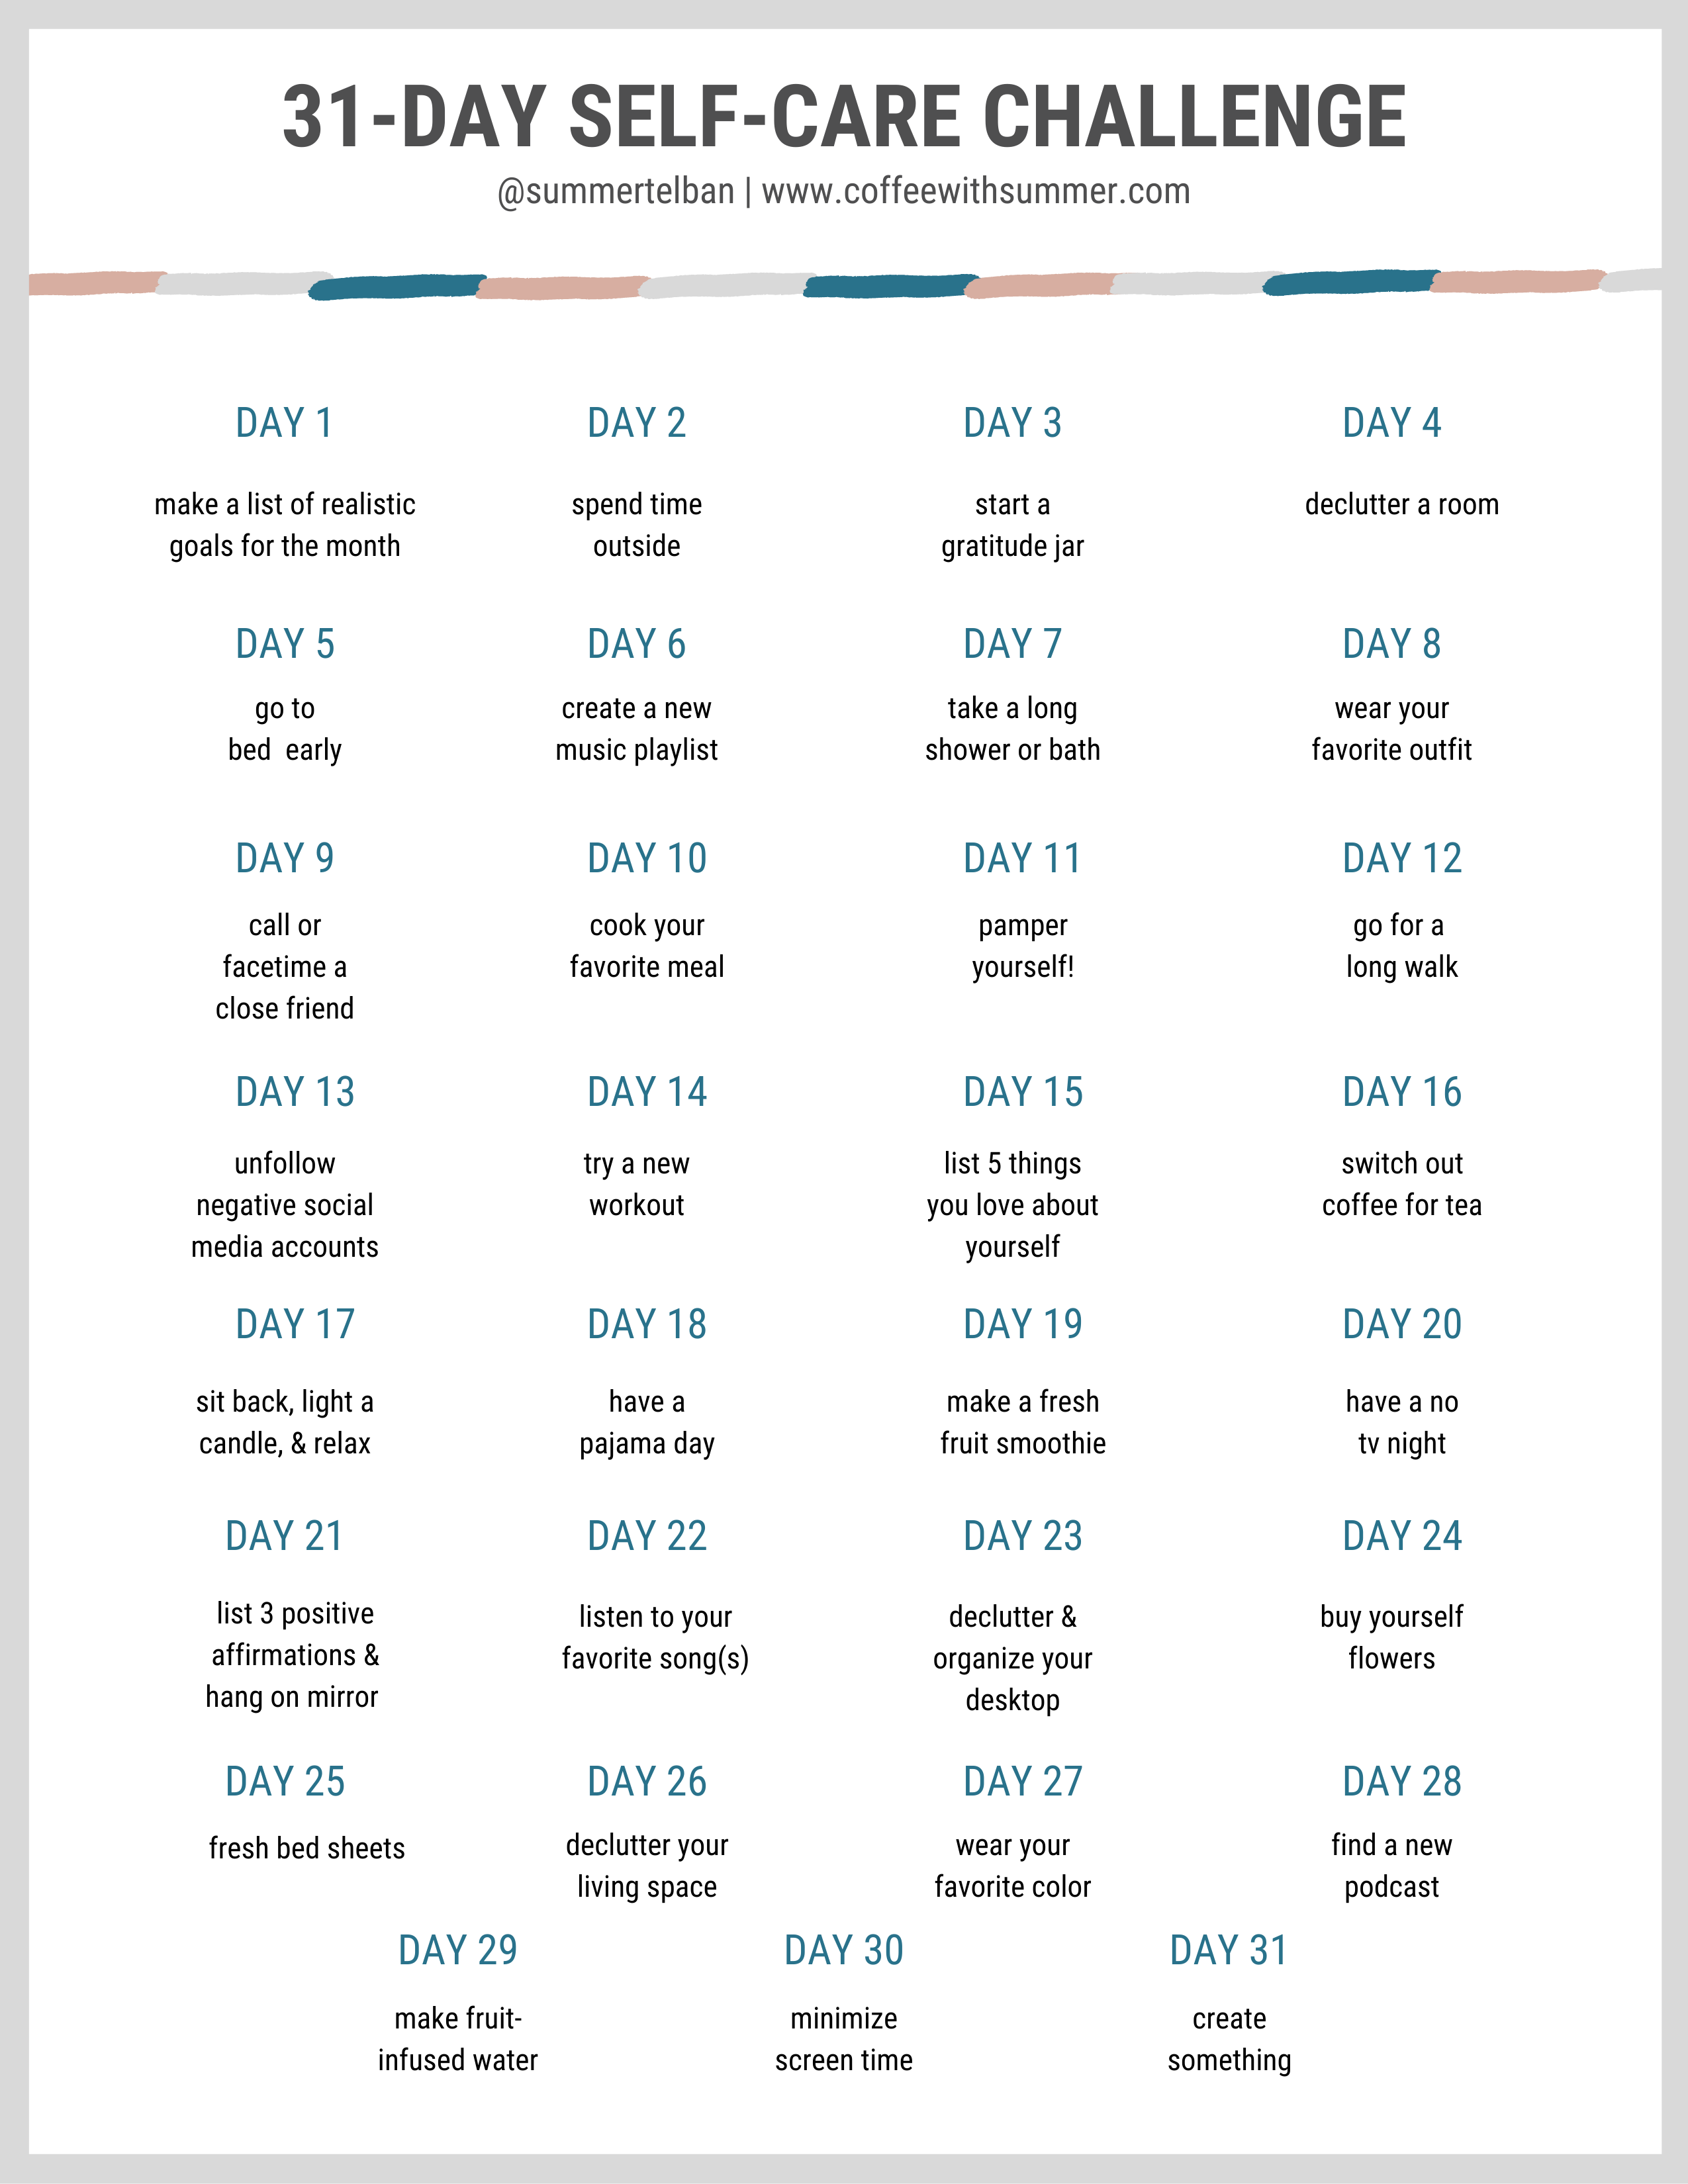 31-Day Self-Care Challenge